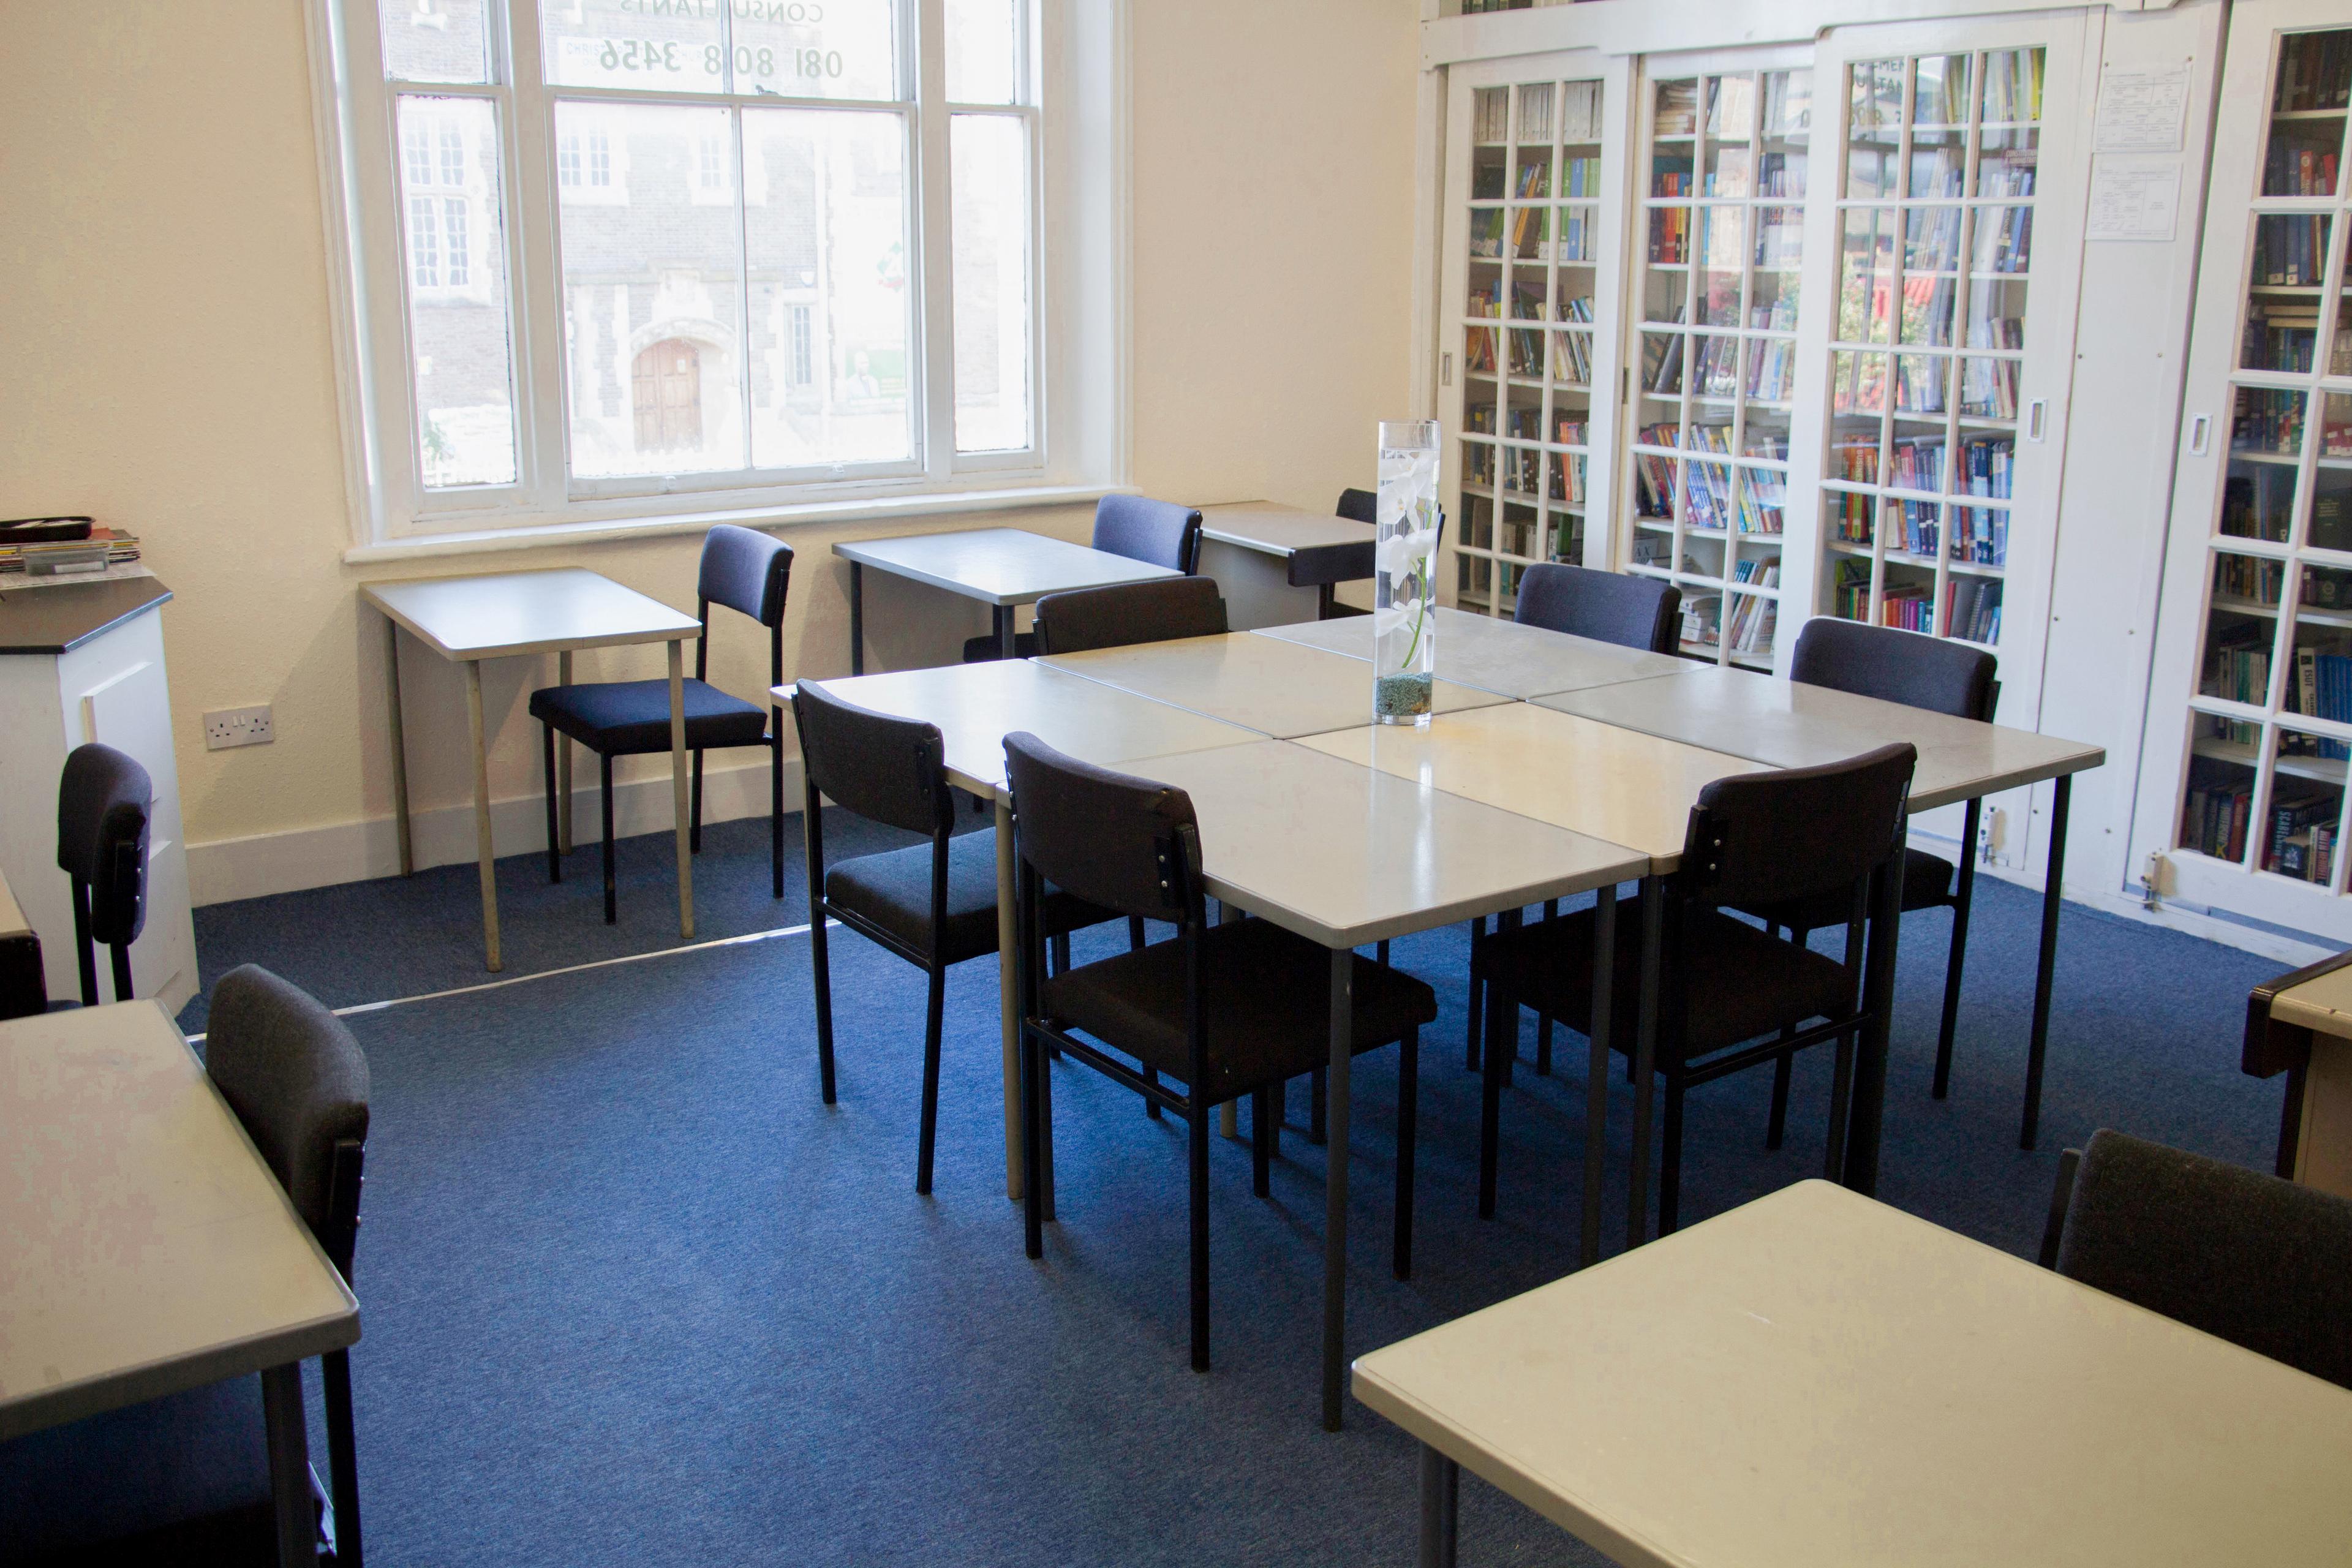 My Meeting Space - North London College, Meeting Room / Classroom 102 photo #3